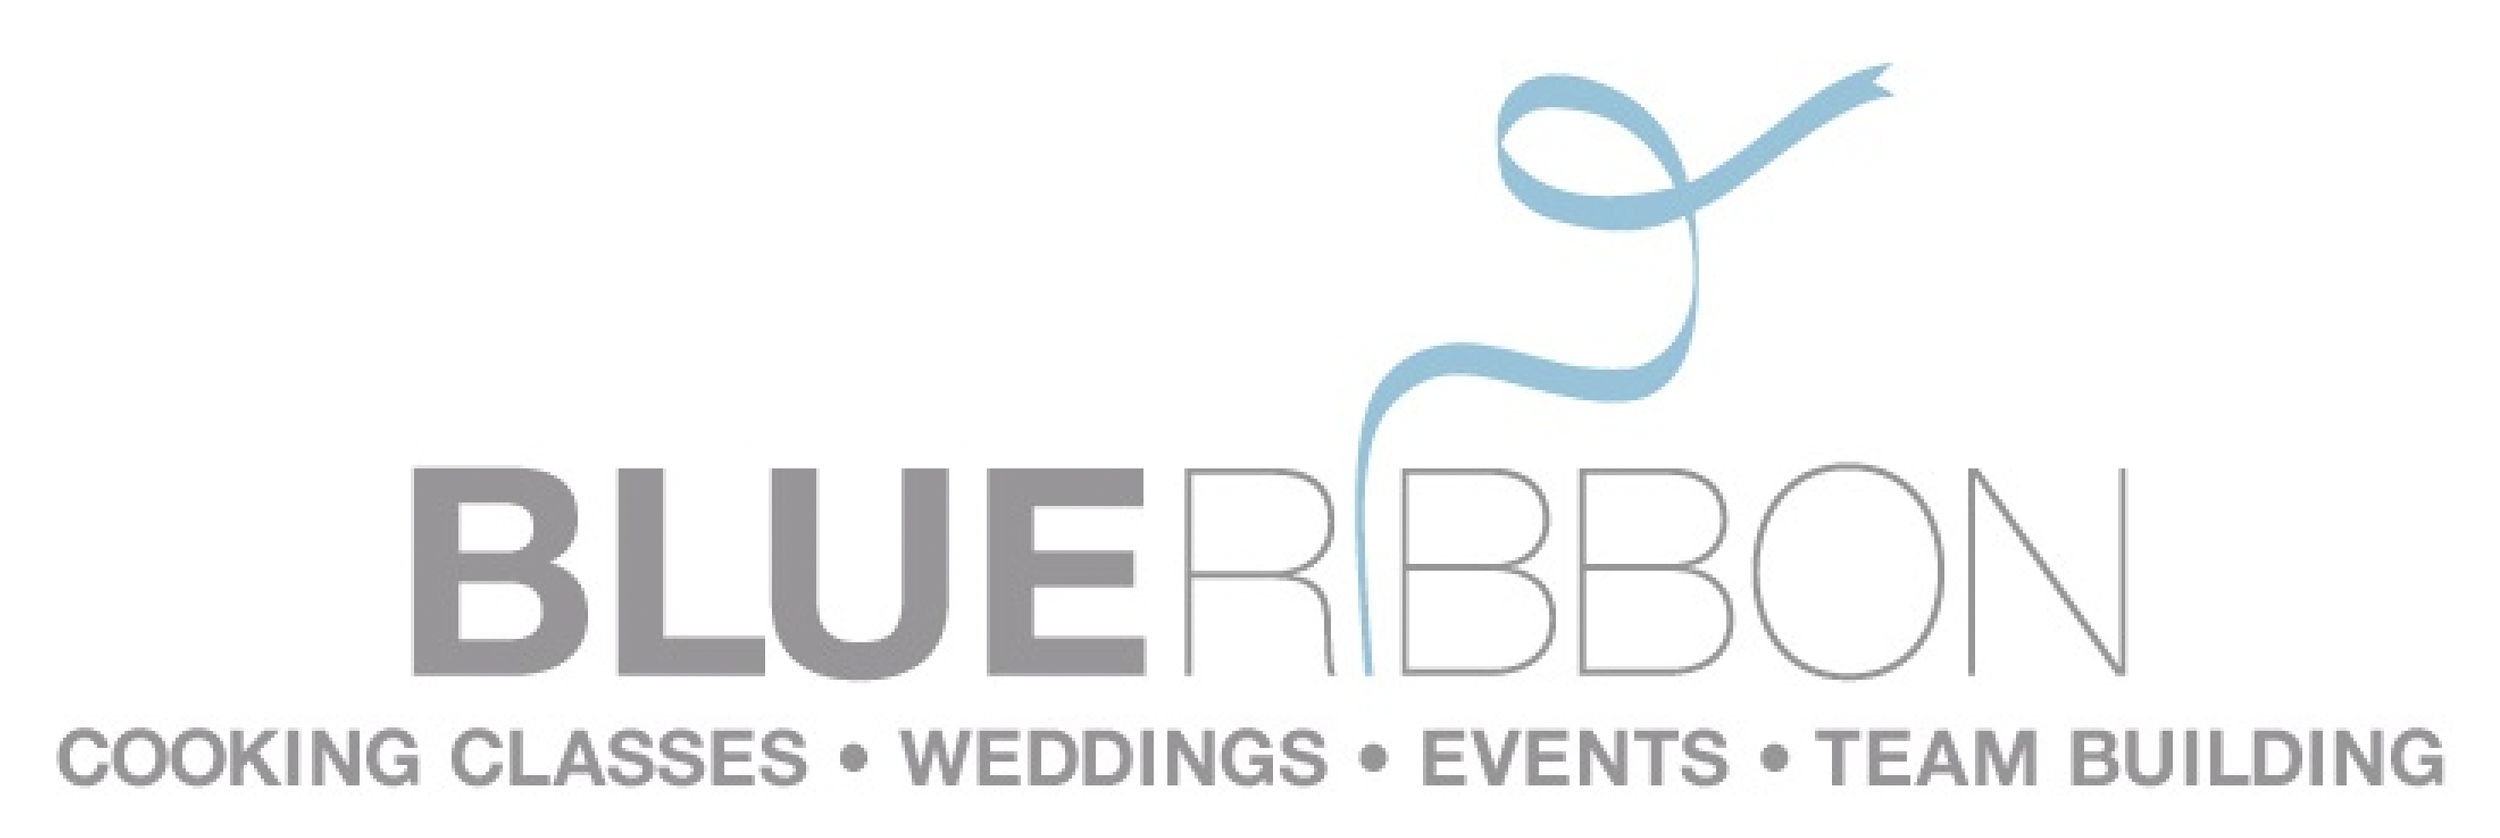 Blue Ribbon Cooking - Catering and Event Venues